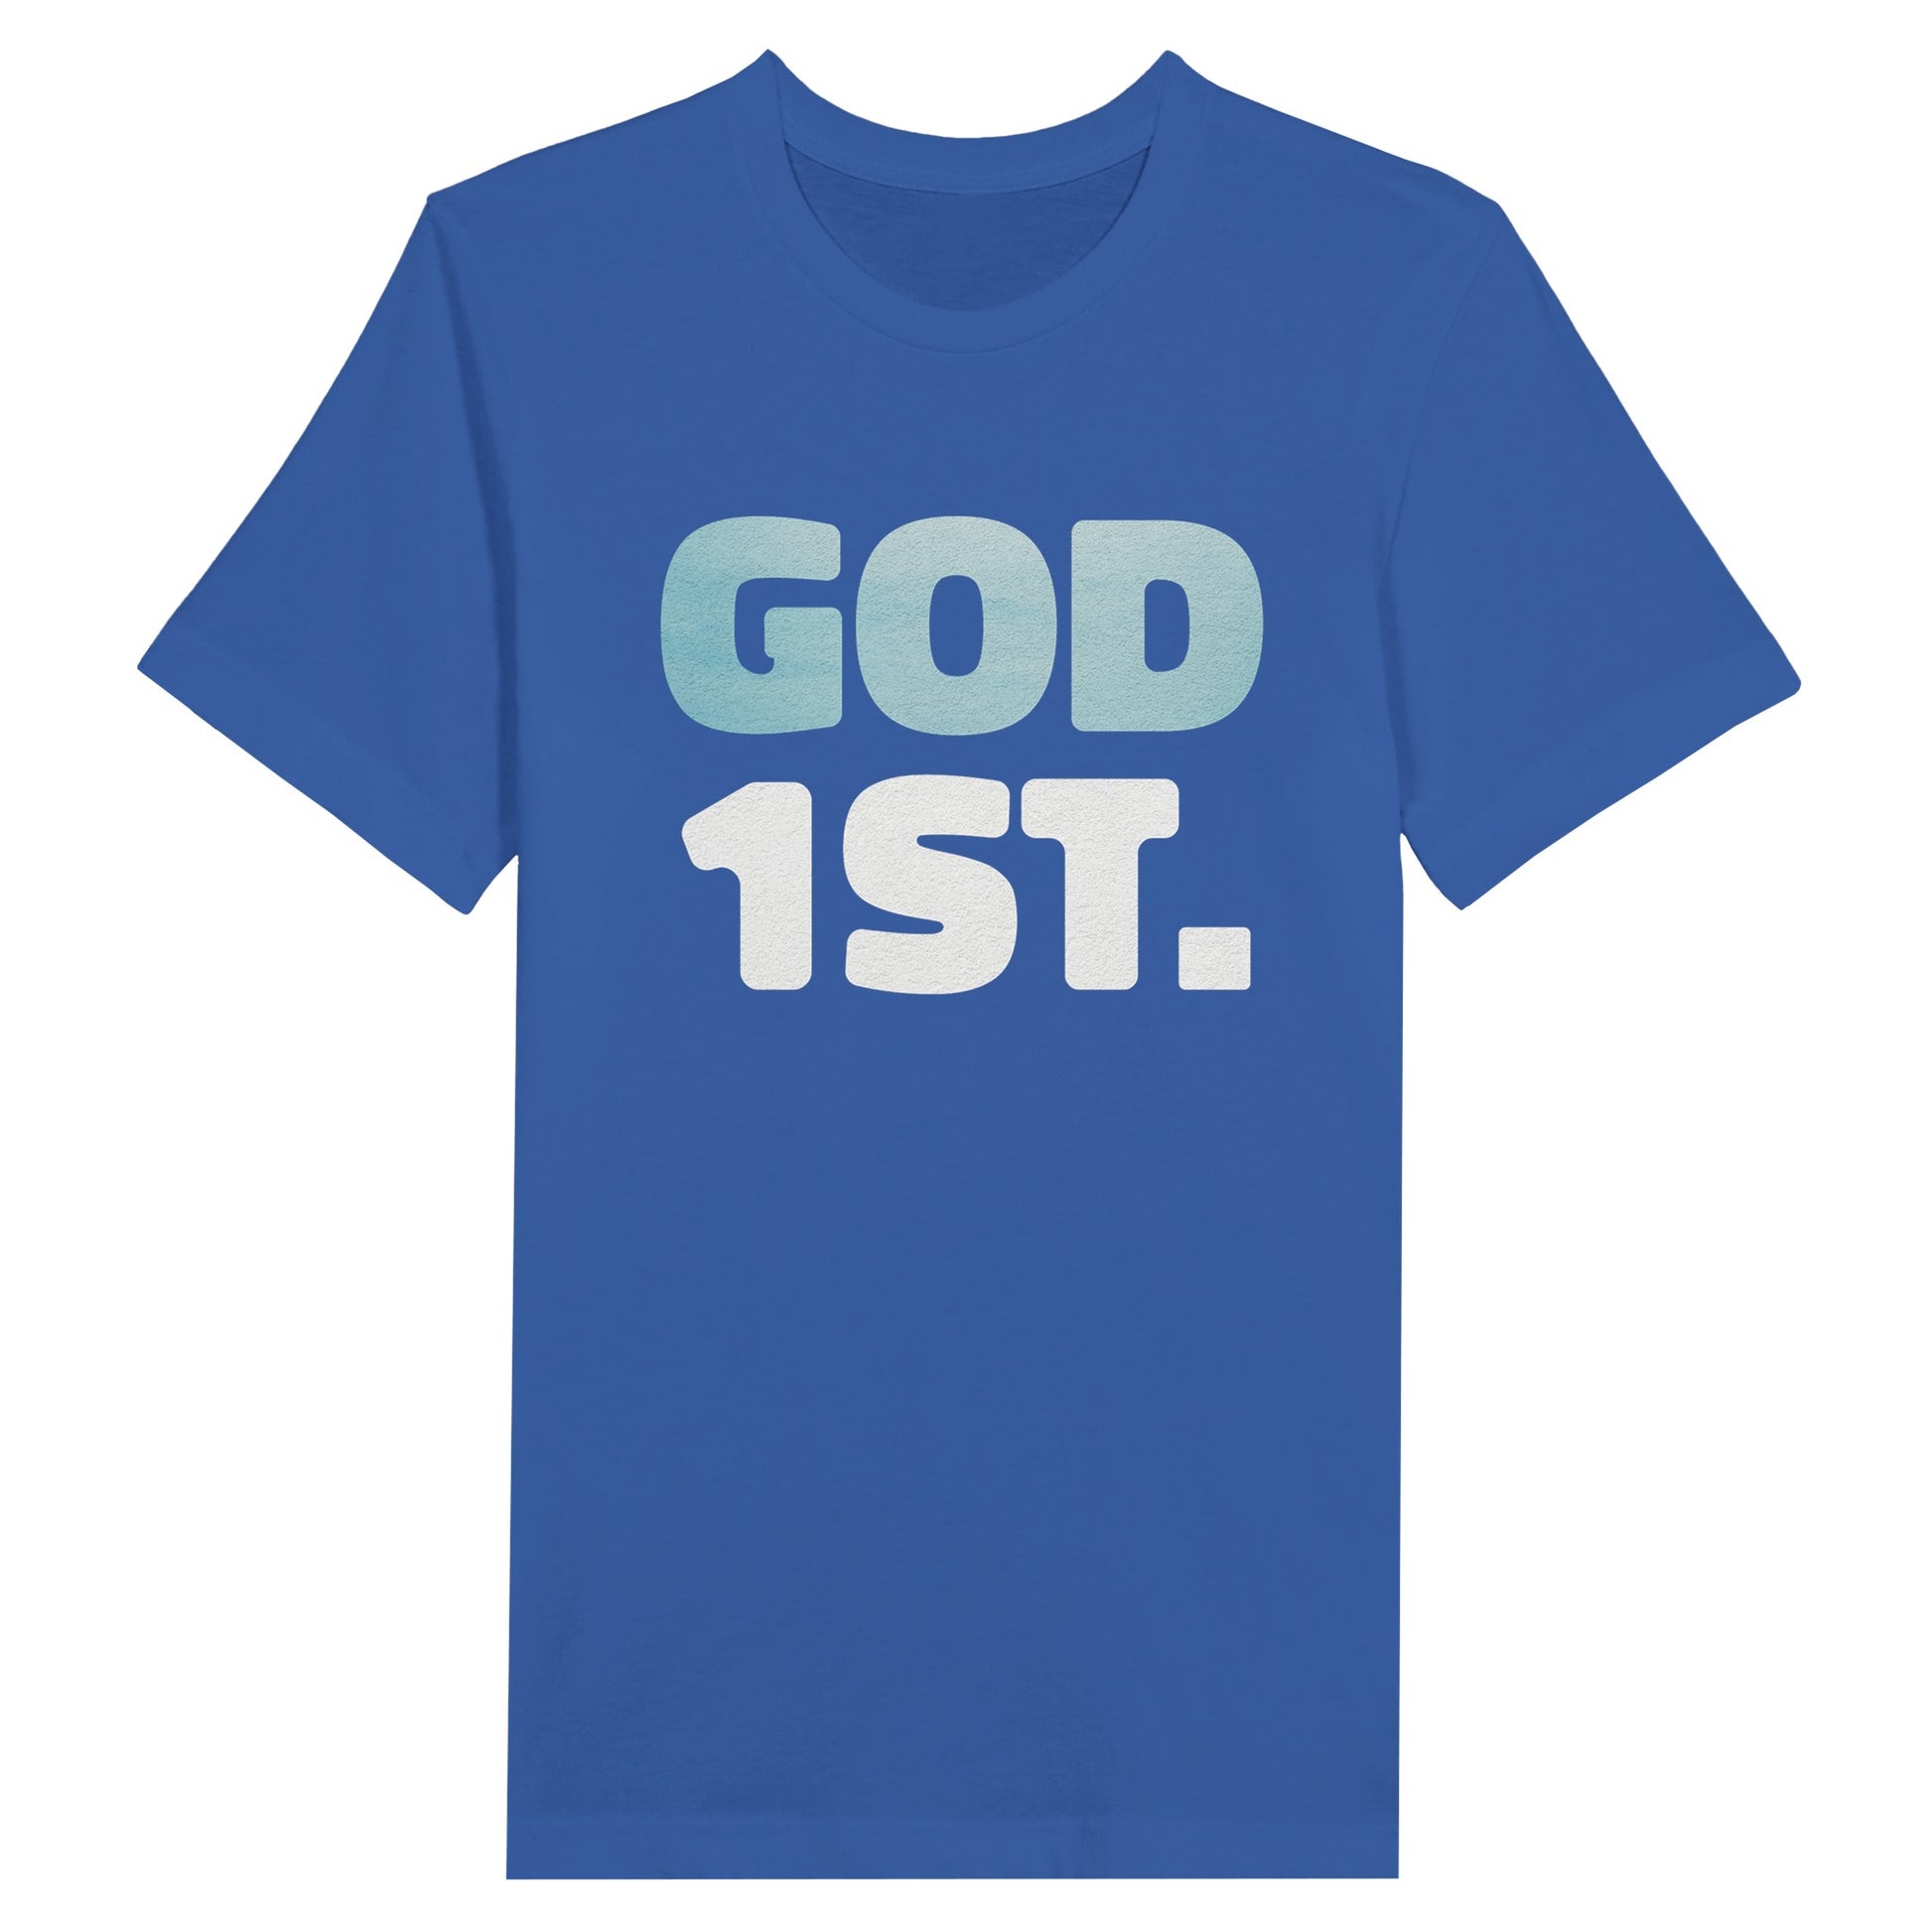 An image of God 1st. | Premium Unisex Christian T-shirt available at 3rd Day Christian Clothing UK